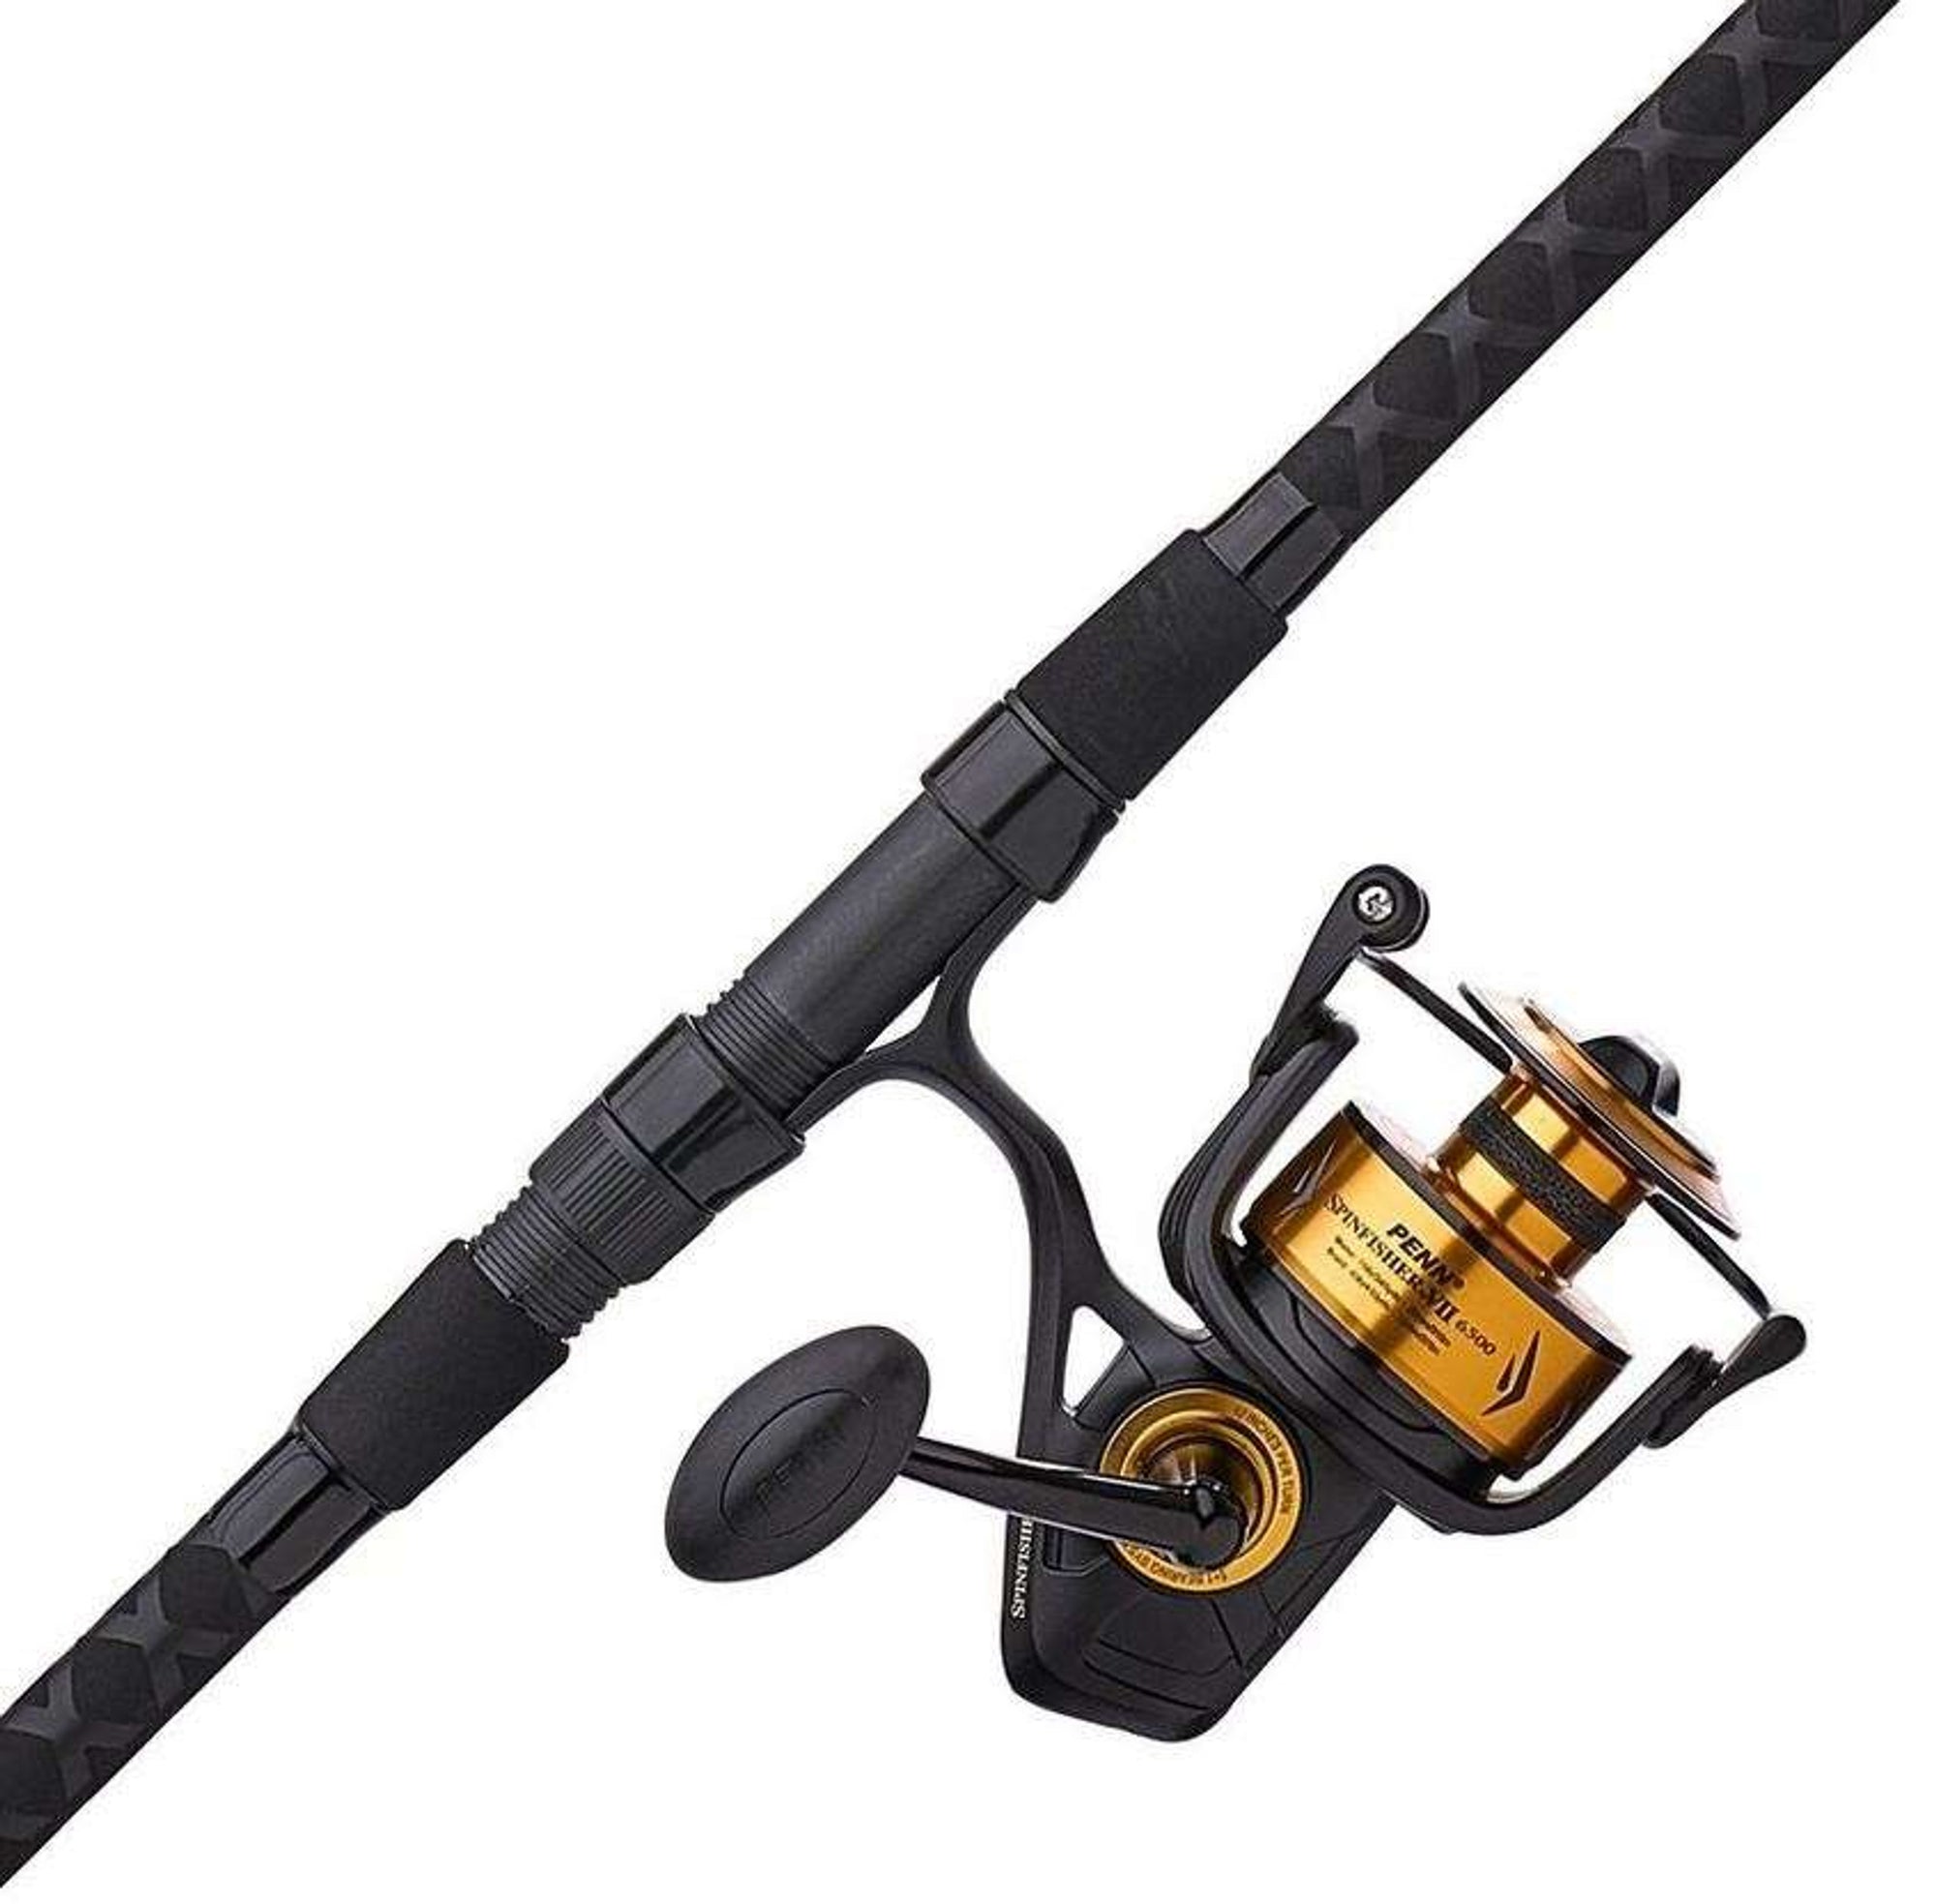 Penn Spinfisher VII Combo 5500 with 8' MH 2-Piece Spin Combo - SSVII5500802MH